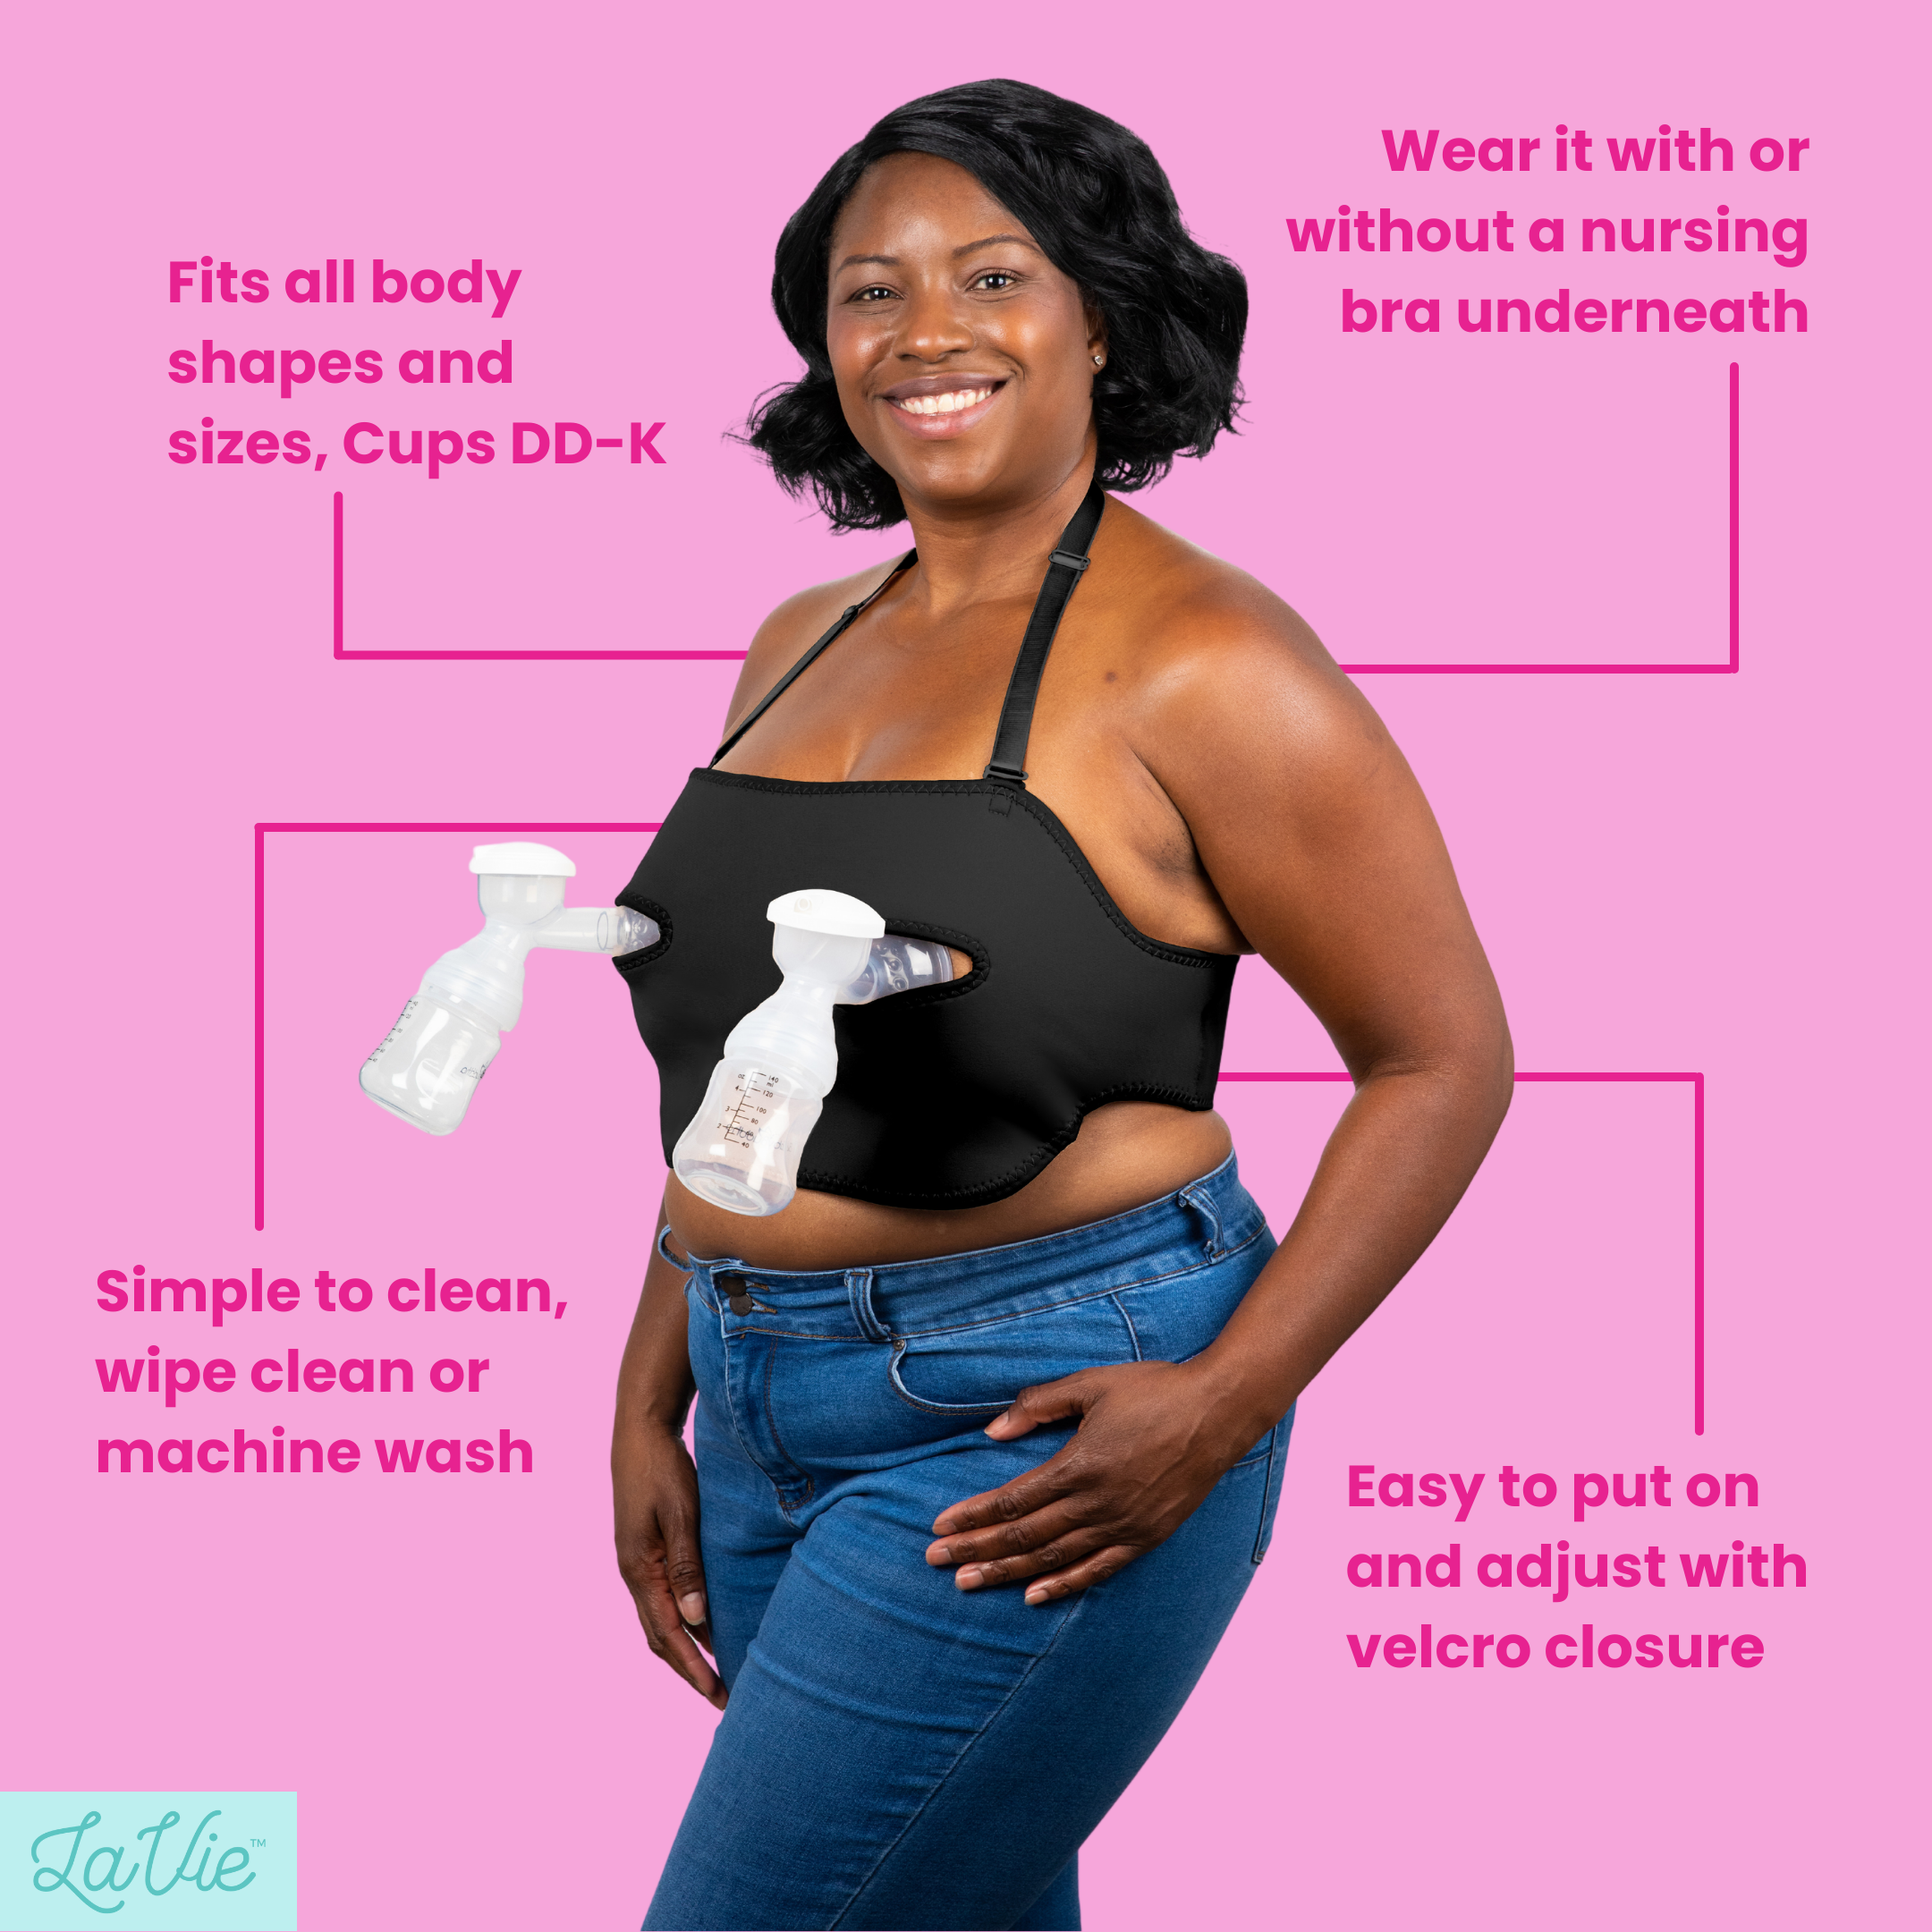 Pump Strap Hands-Free Pumping & Nursing Bra – Pump More in Less Time with  Compression – PumpStrap